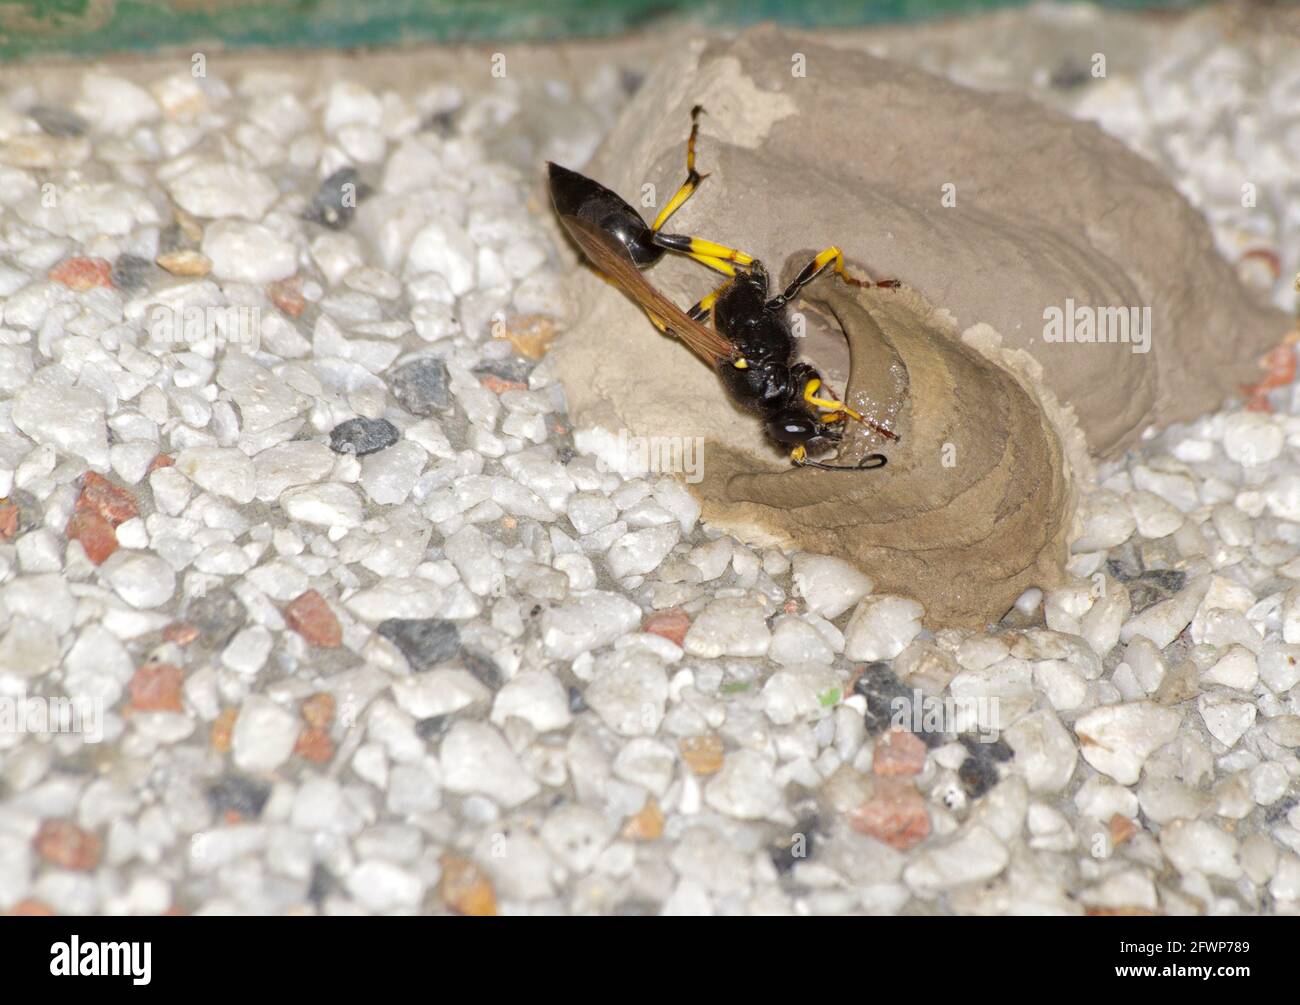 Sceliphron destillatorium wasp  building a nests of mud. Close up of insect. Stock Photo